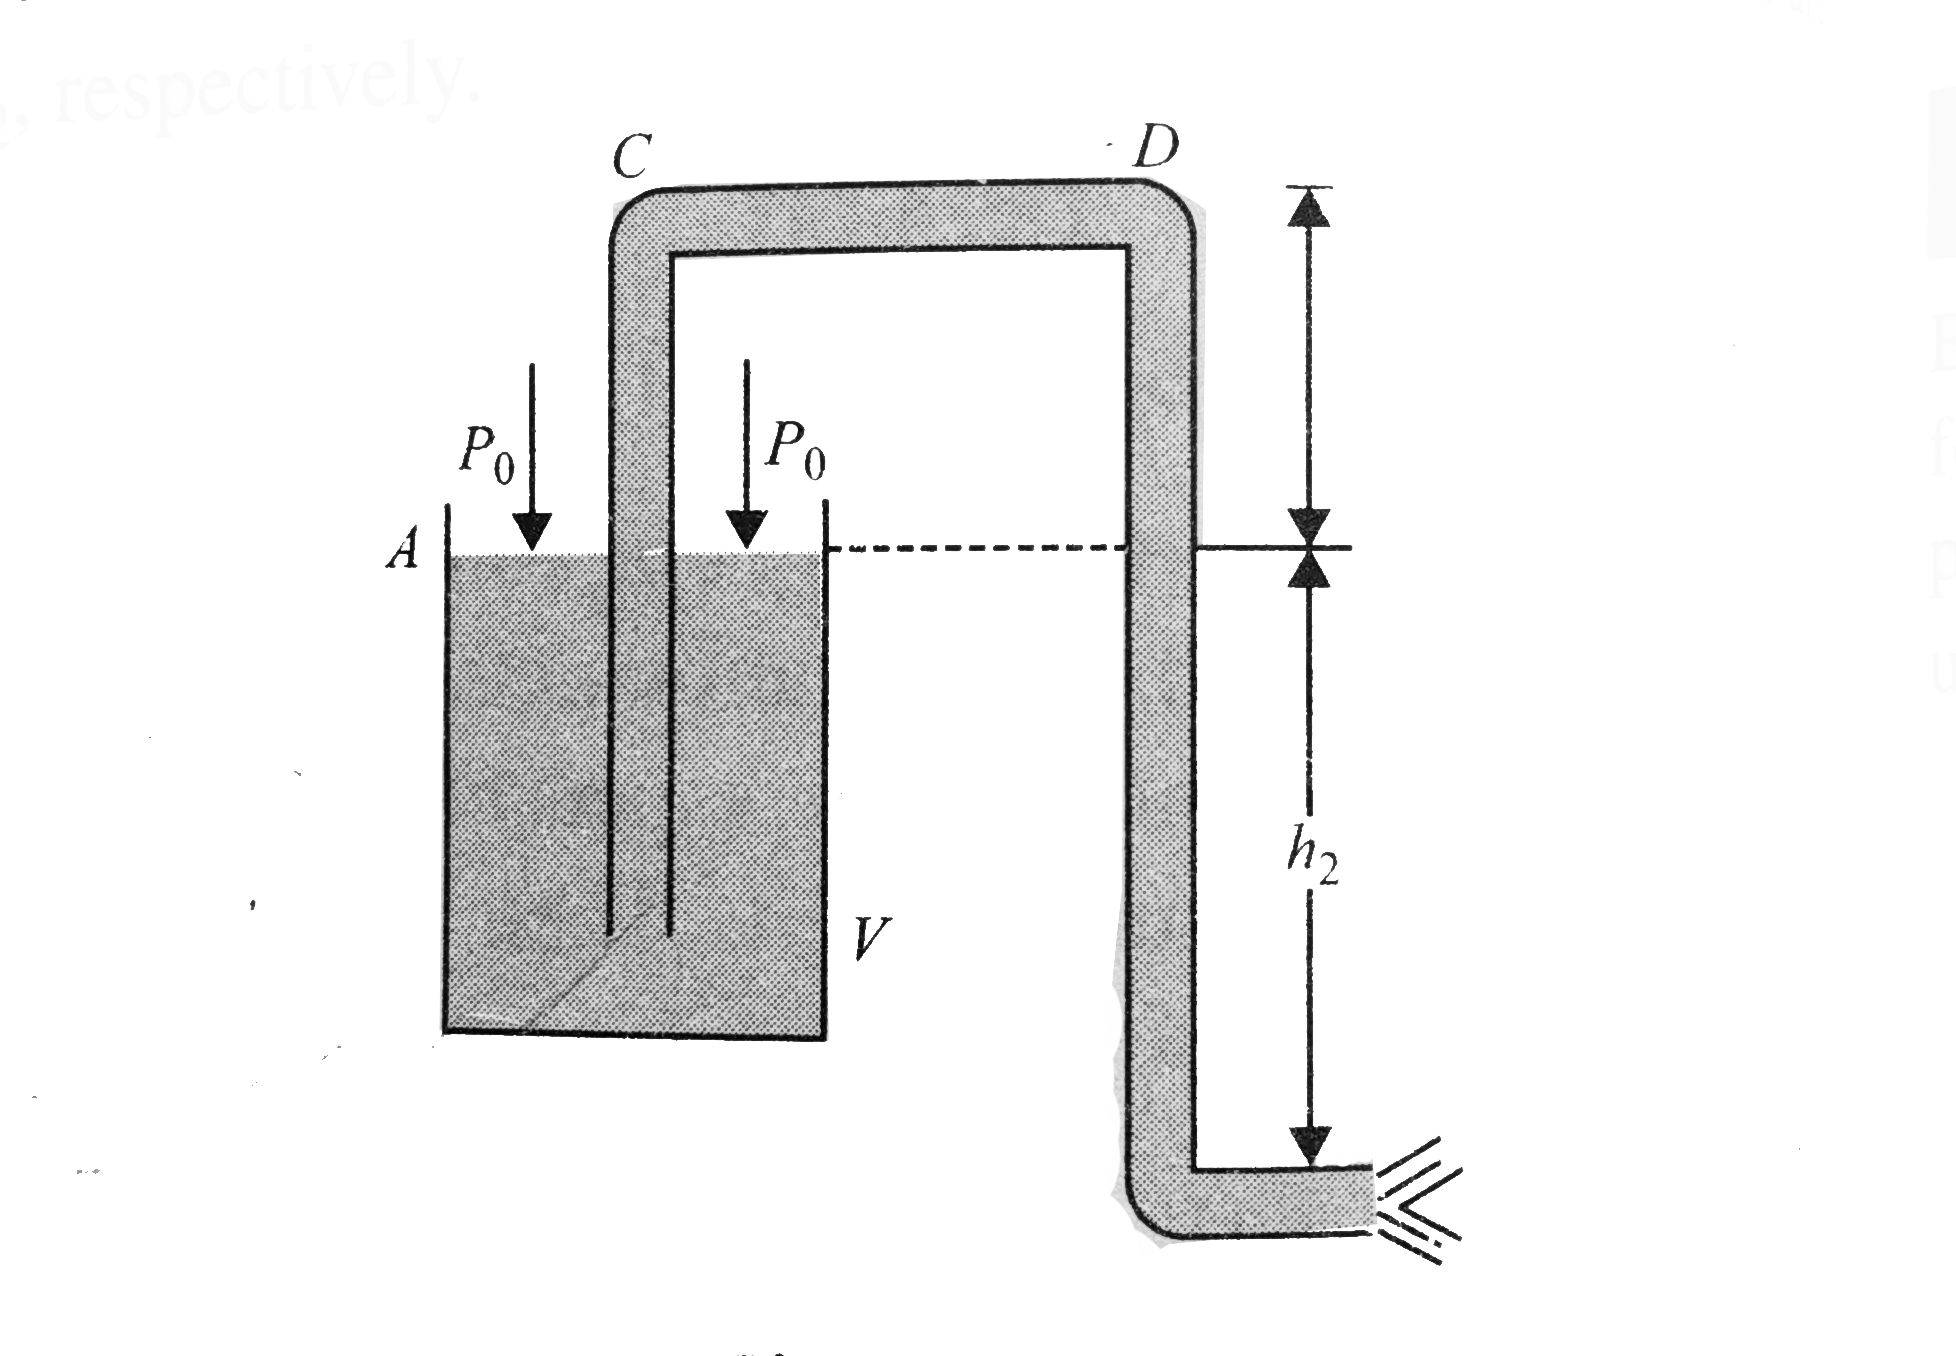 A tube of uniform cross section is used to siphon water from a vessel V as shown in the figure. The pressure over the open end of water in the vessel is atmospheric pressure (P(0)). The height of the tube above and below the water level in the vessel are h(1) and h(2), respectively.      Given h(1) = h(2) = 3.0 m, the gauge pressure of water in the highest level CD of the tube will be